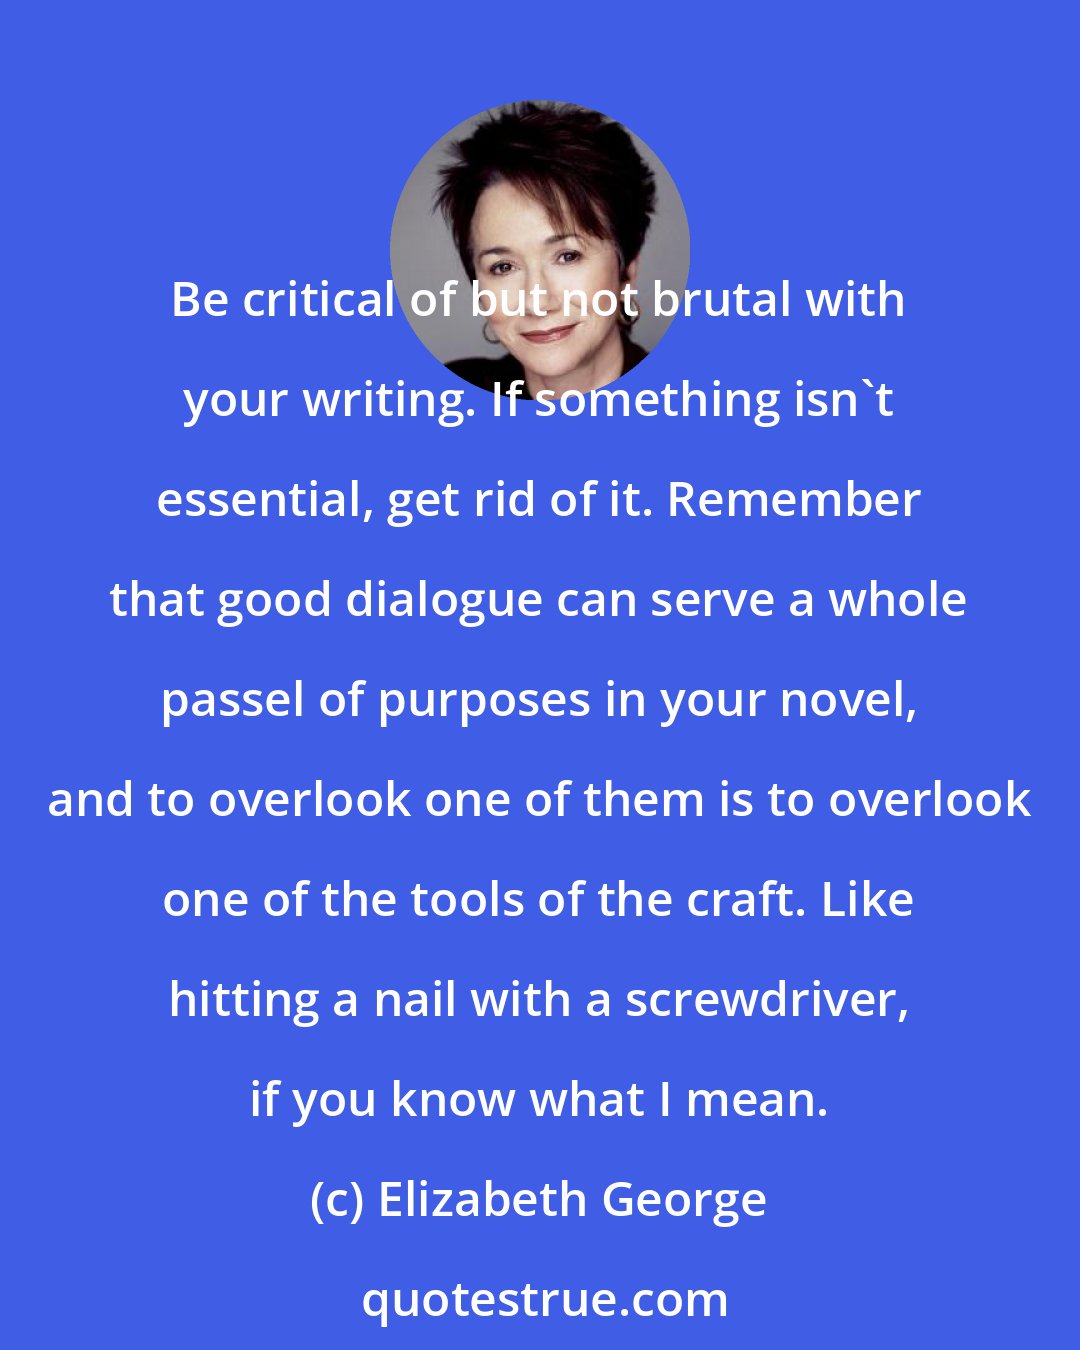 Elizabeth George: Be critical of but not brutal with your writing. If something isn't essential, get rid of it. Remember that good dialogue can serve a whole passel of purposes in your novel, and to overlook one of them is to overlook one of the tools of the craft. Like hitting a nail with a screwdriver, if you know what I mean.